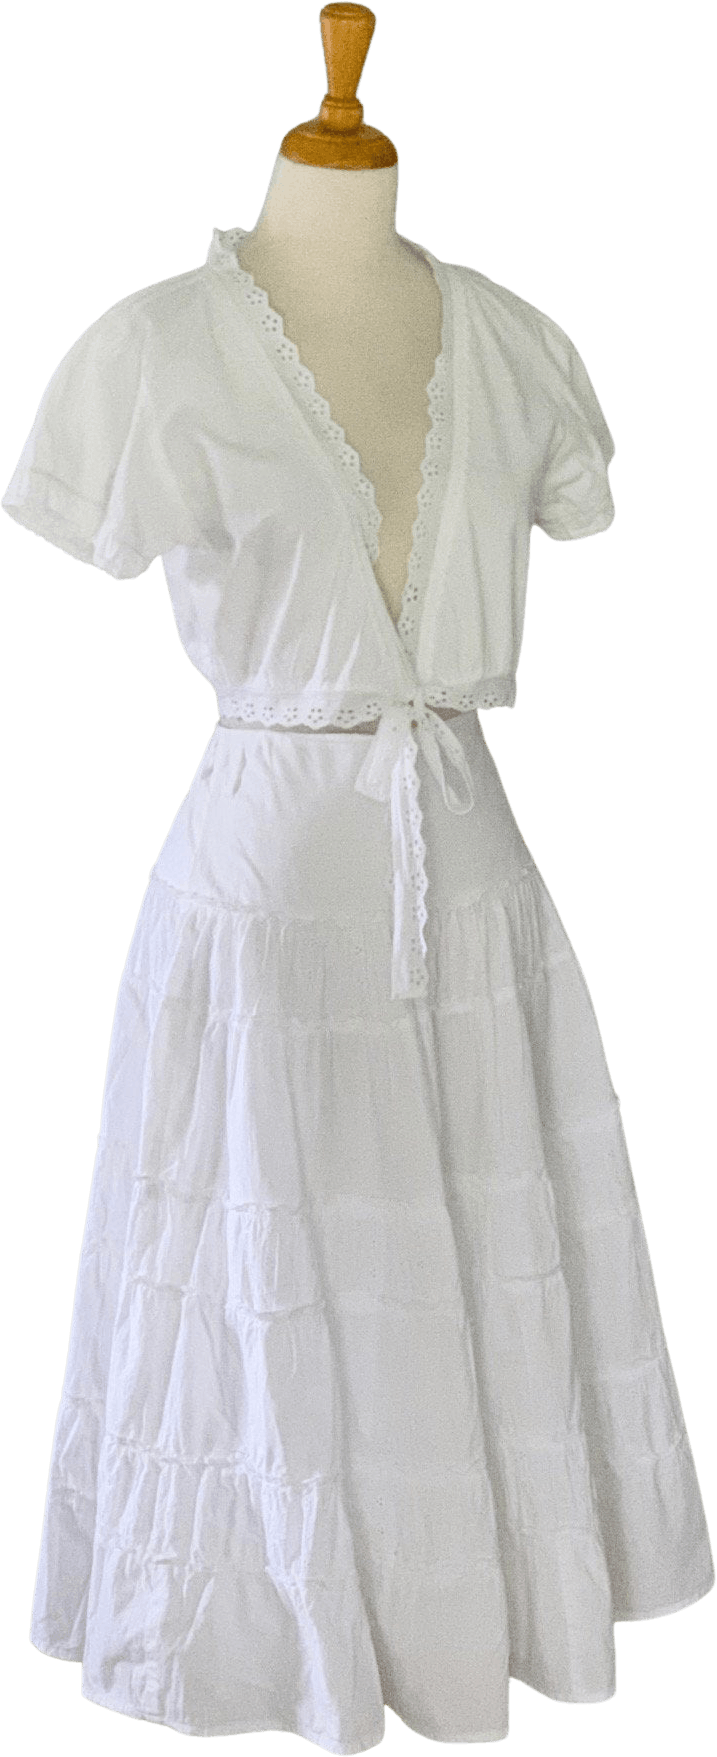 Vintage 80’s White Eyelet Trim Front Tie Top and Tiered Skirt Set by ...